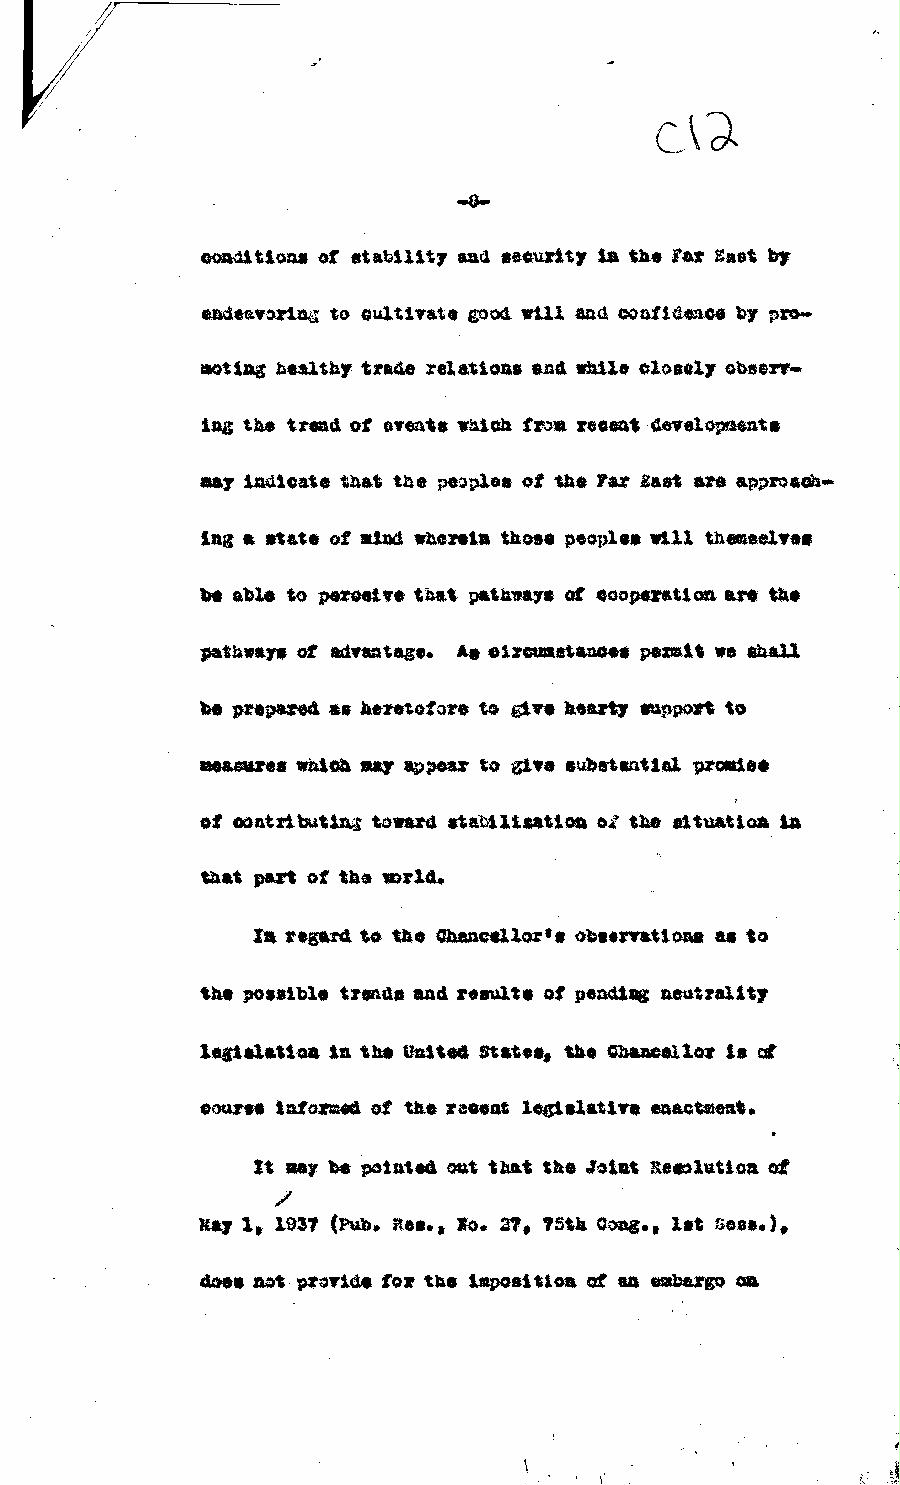 [a303c12.jpg] - Cont-memo from Dept. of State5/28/37